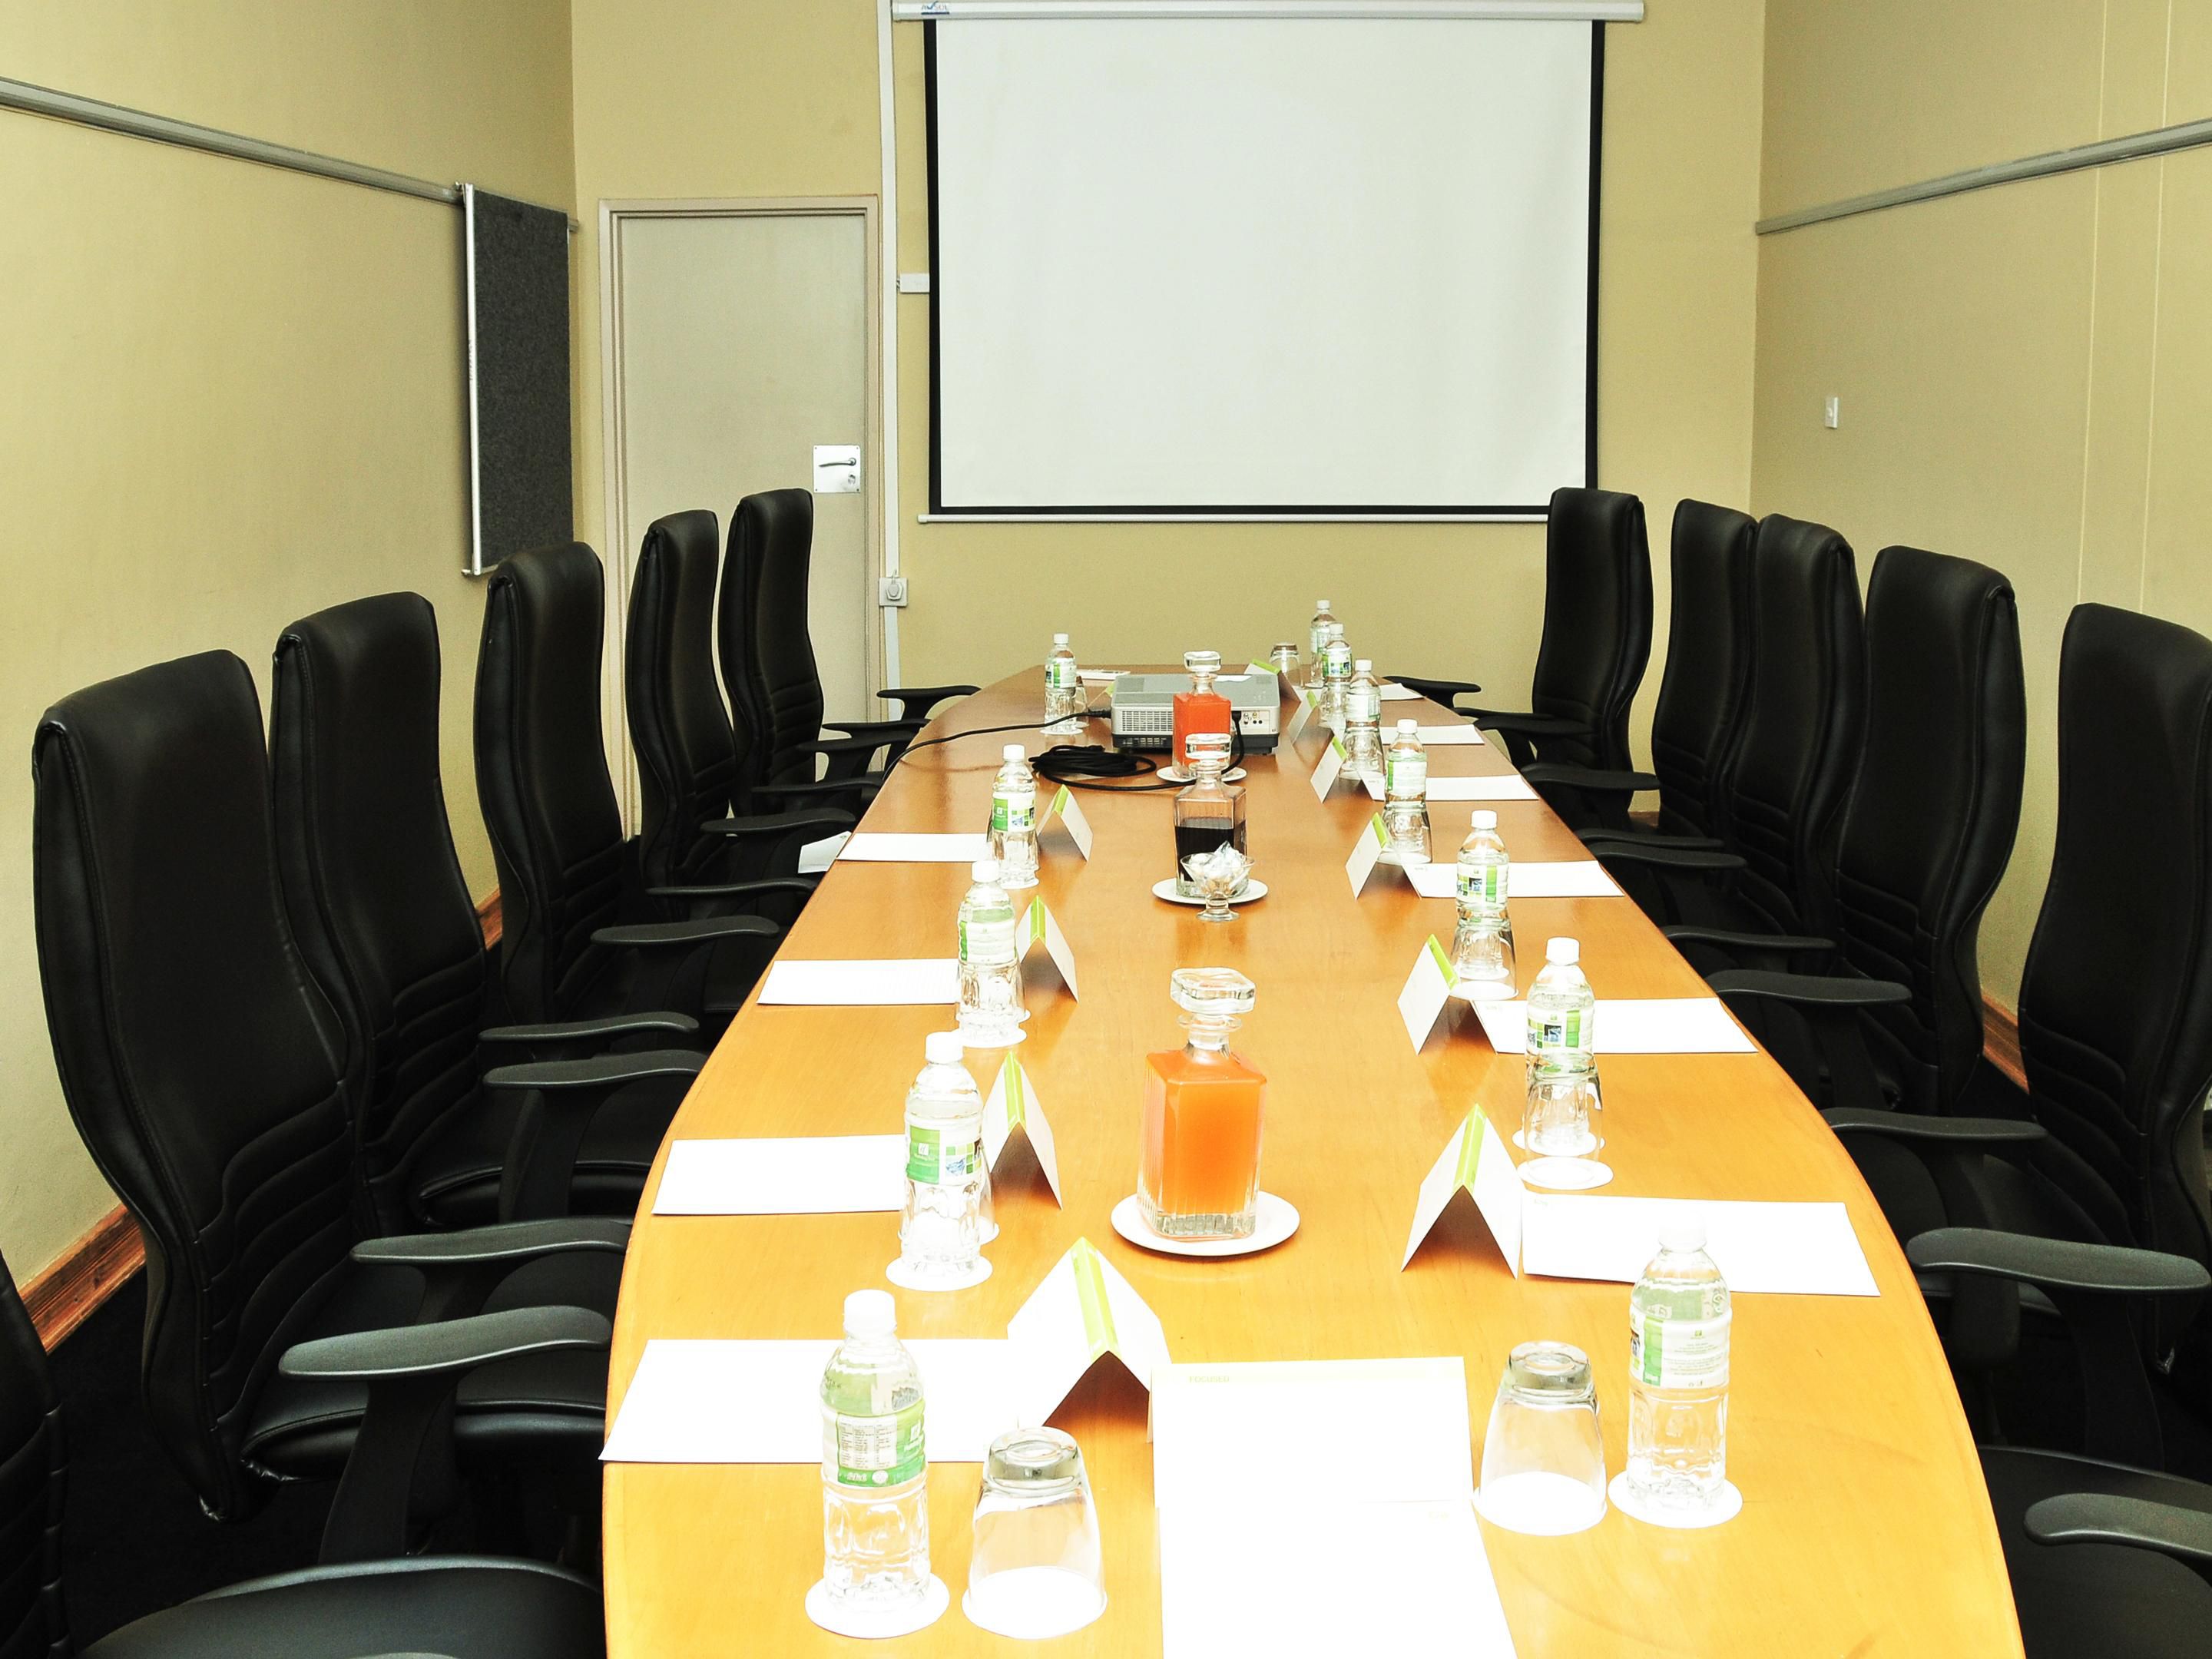 Conference with us in our wide range of conference rooms and executive boardrooms. Fully furnished and air conditioned 